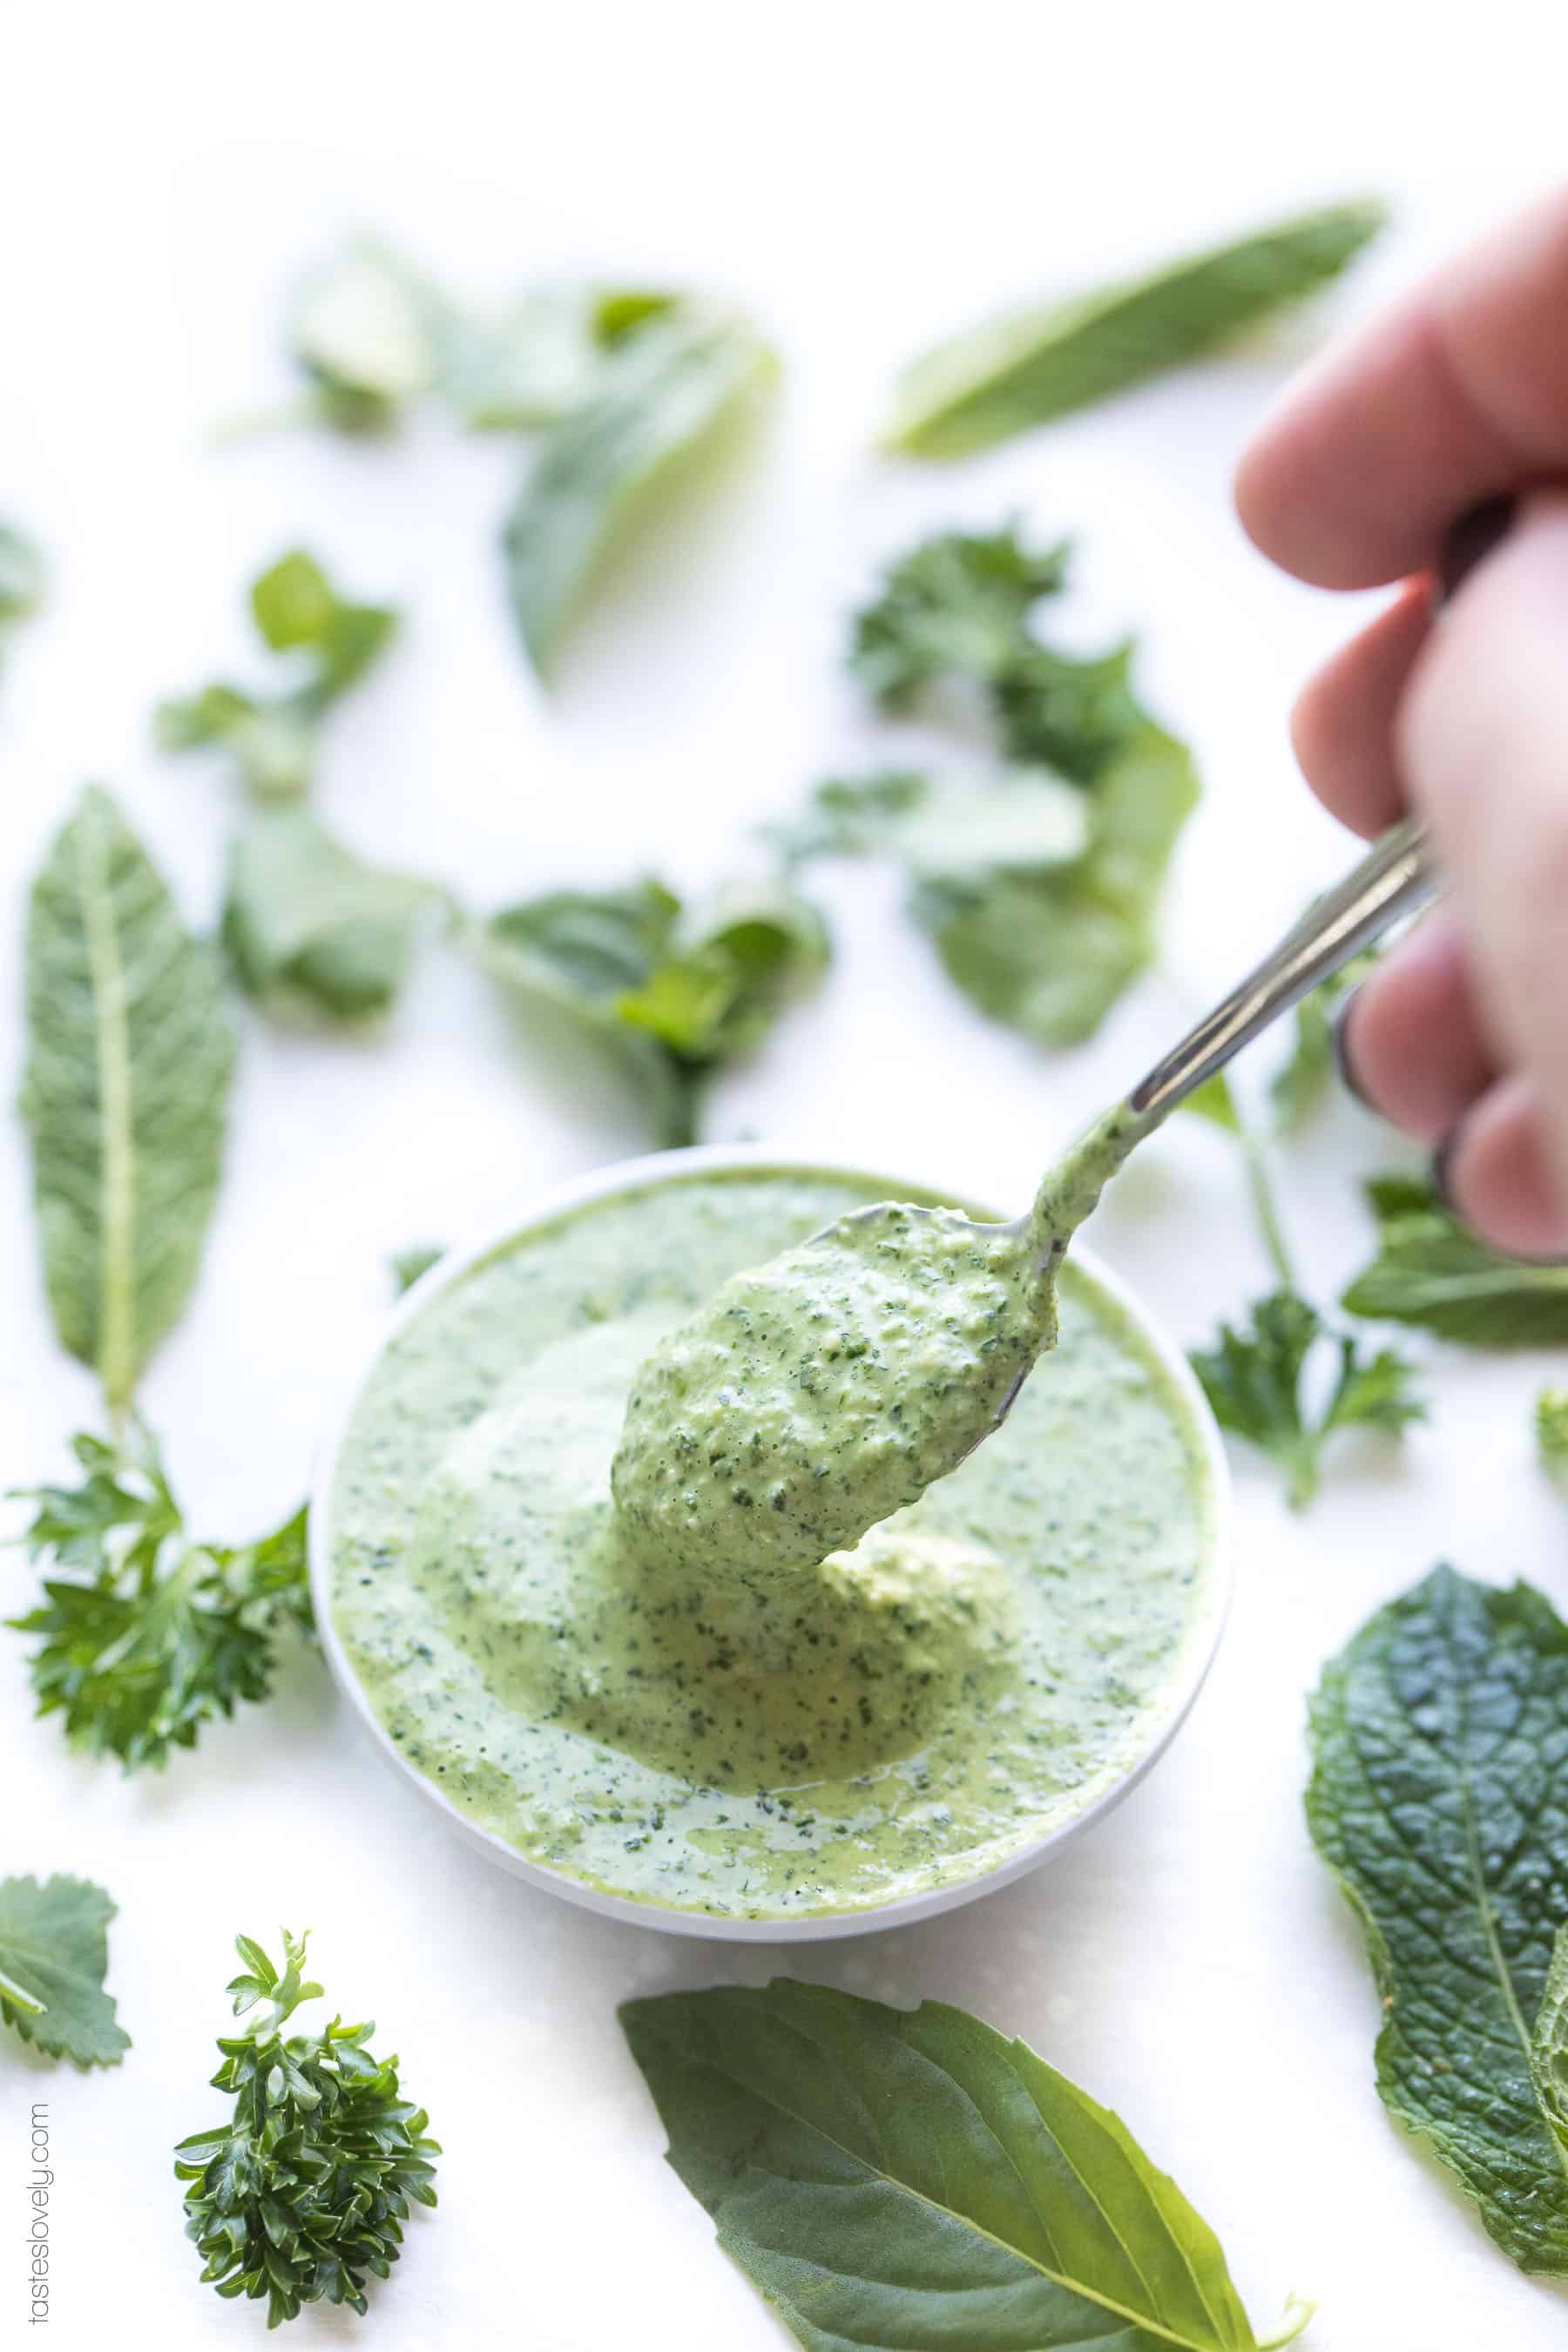 Paleo Herby Green Dressing - a light and refreshing dressing made with parsley, mint, basil and cilantro. Delicious on salads, meat and vegetables! Gluten free, dairy free, sugar free, clean eating.-1.CR2